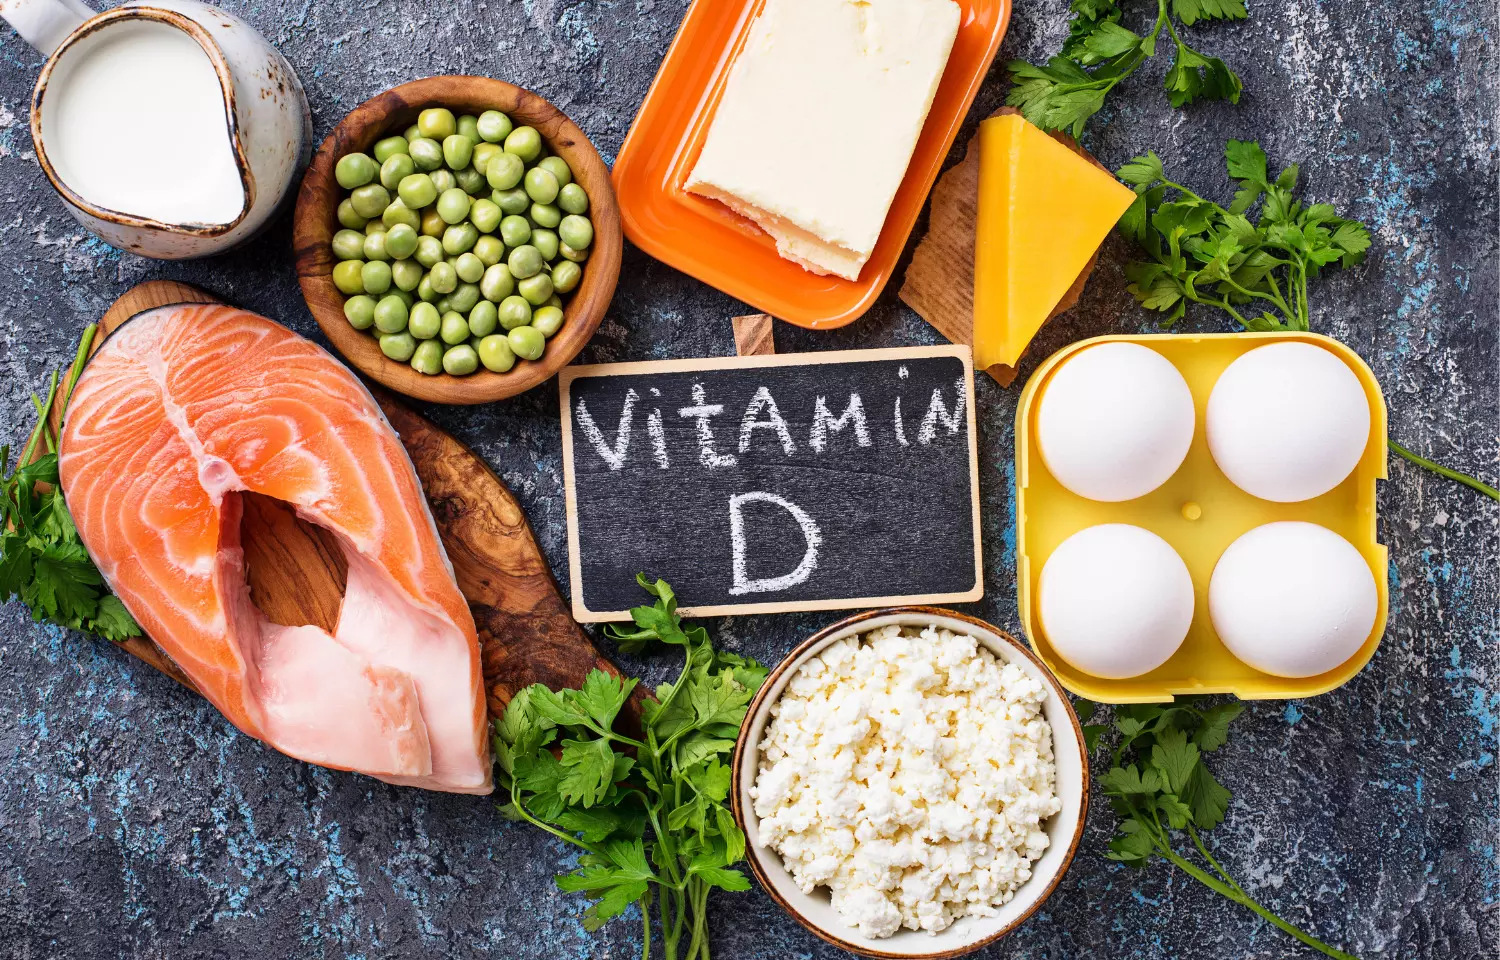 Vitamin D fortification works better in water or milk than in juice